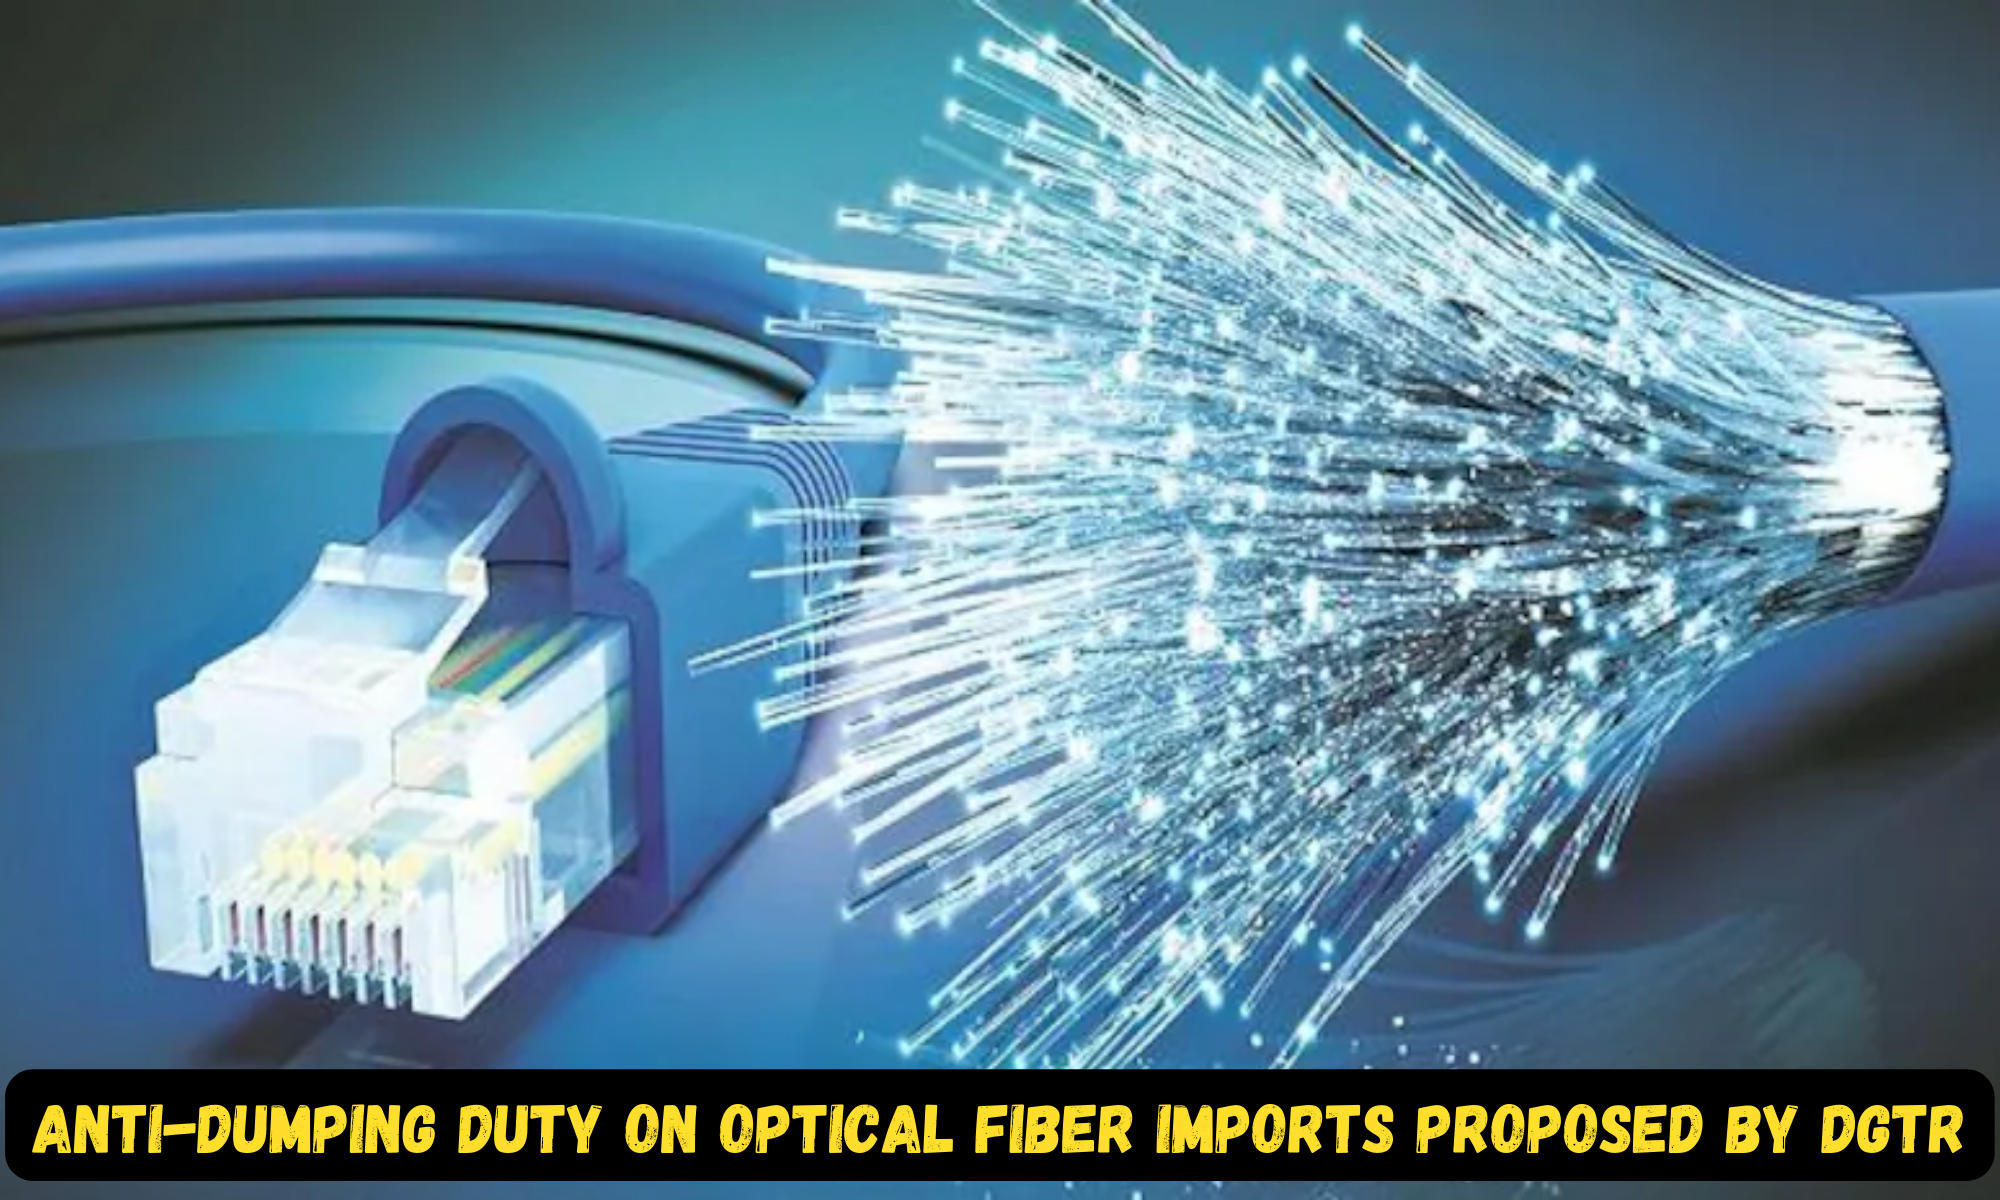 Anti-Dumping Duty on Optical Fiber Imports proposed by DGTR